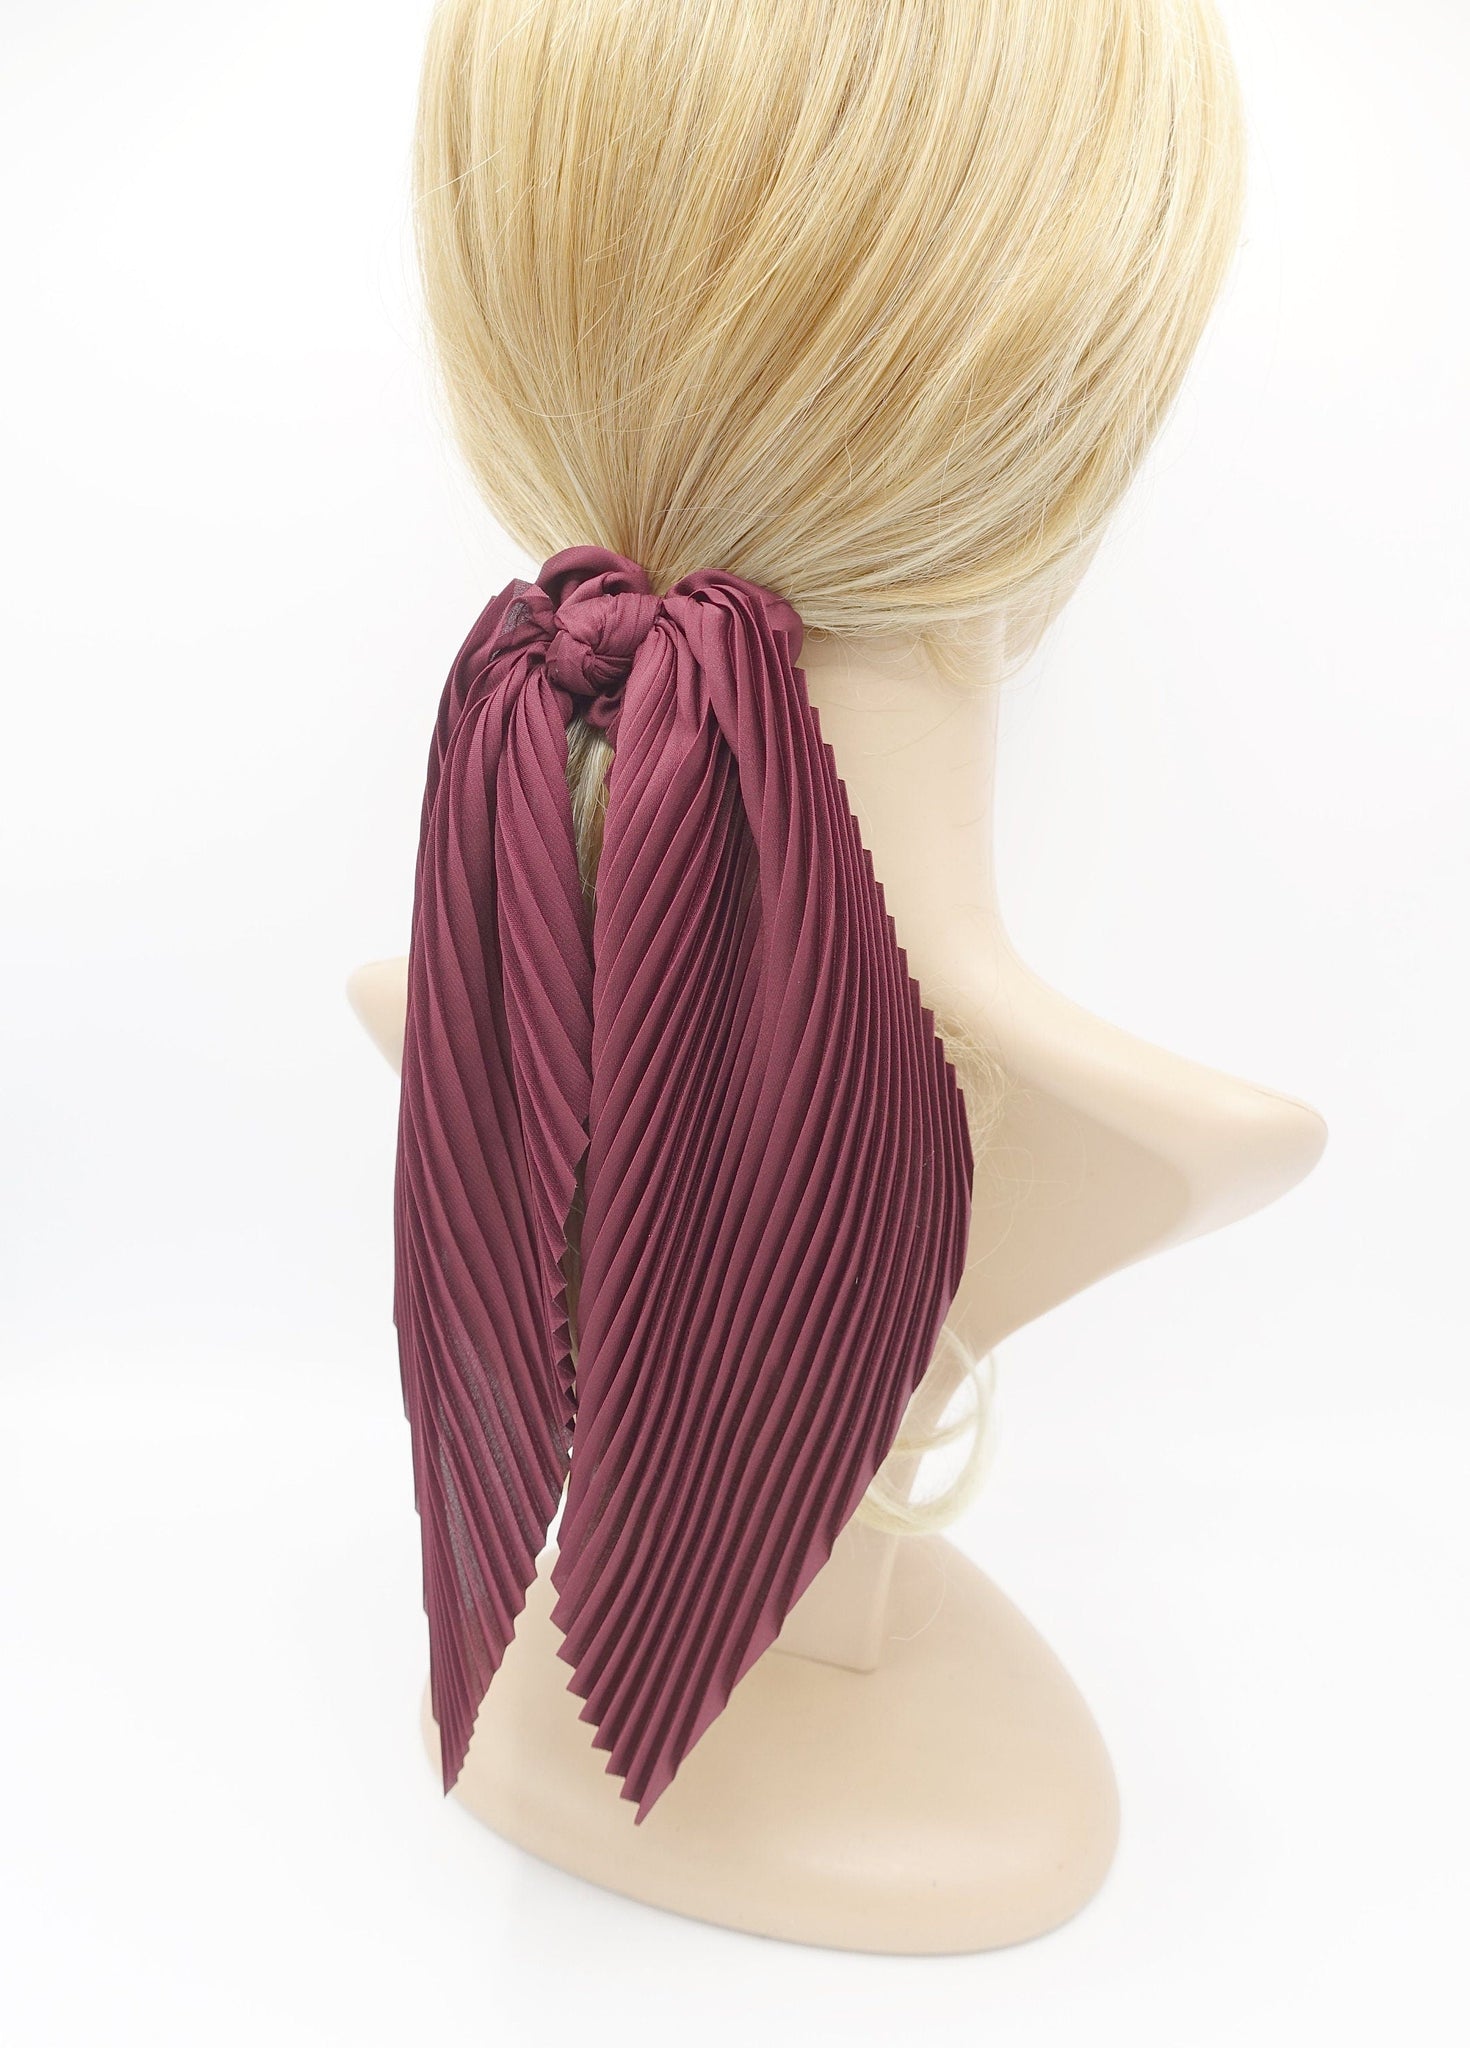 veryshine.com Scrunchies Red wine pleated scrunchies tailed glossy hair elastic hair accessory for women